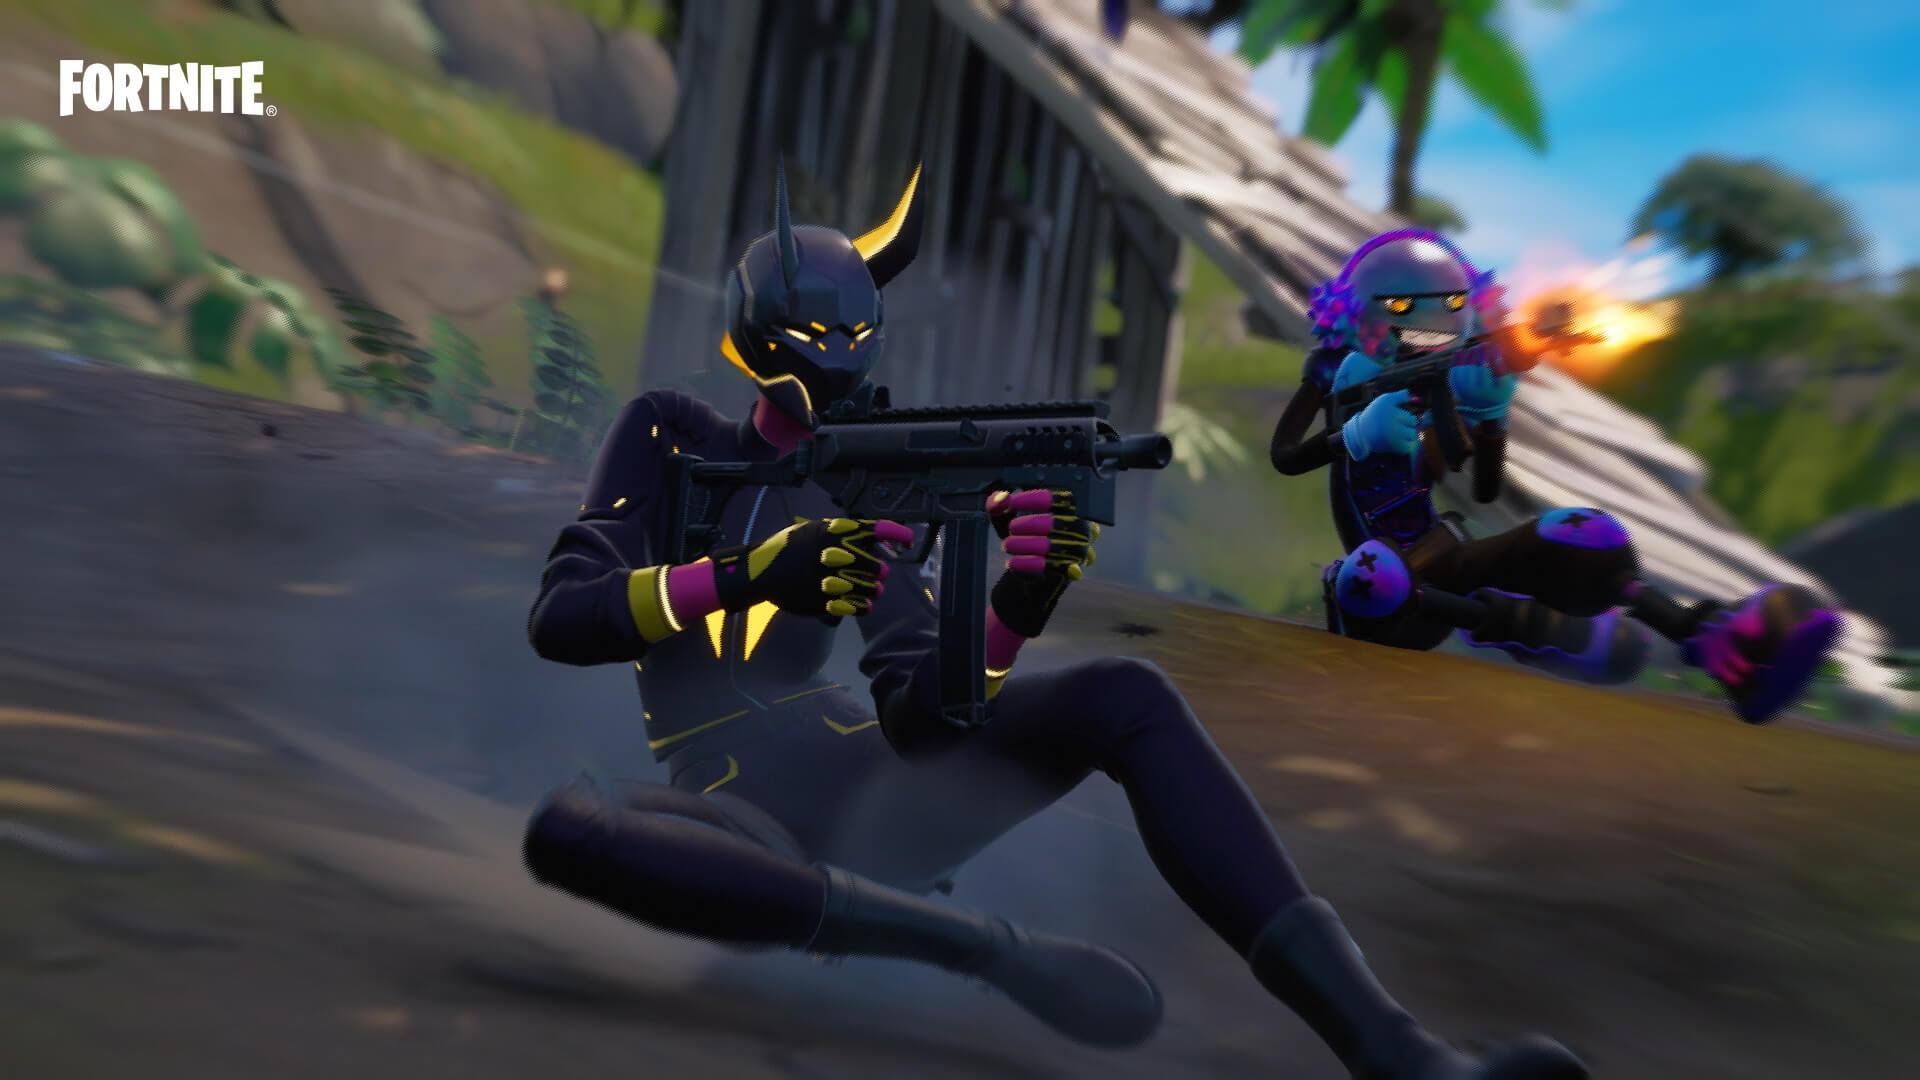 Fortnite returns to iPhones via Epic and Nvidia GeForce Now tie-up